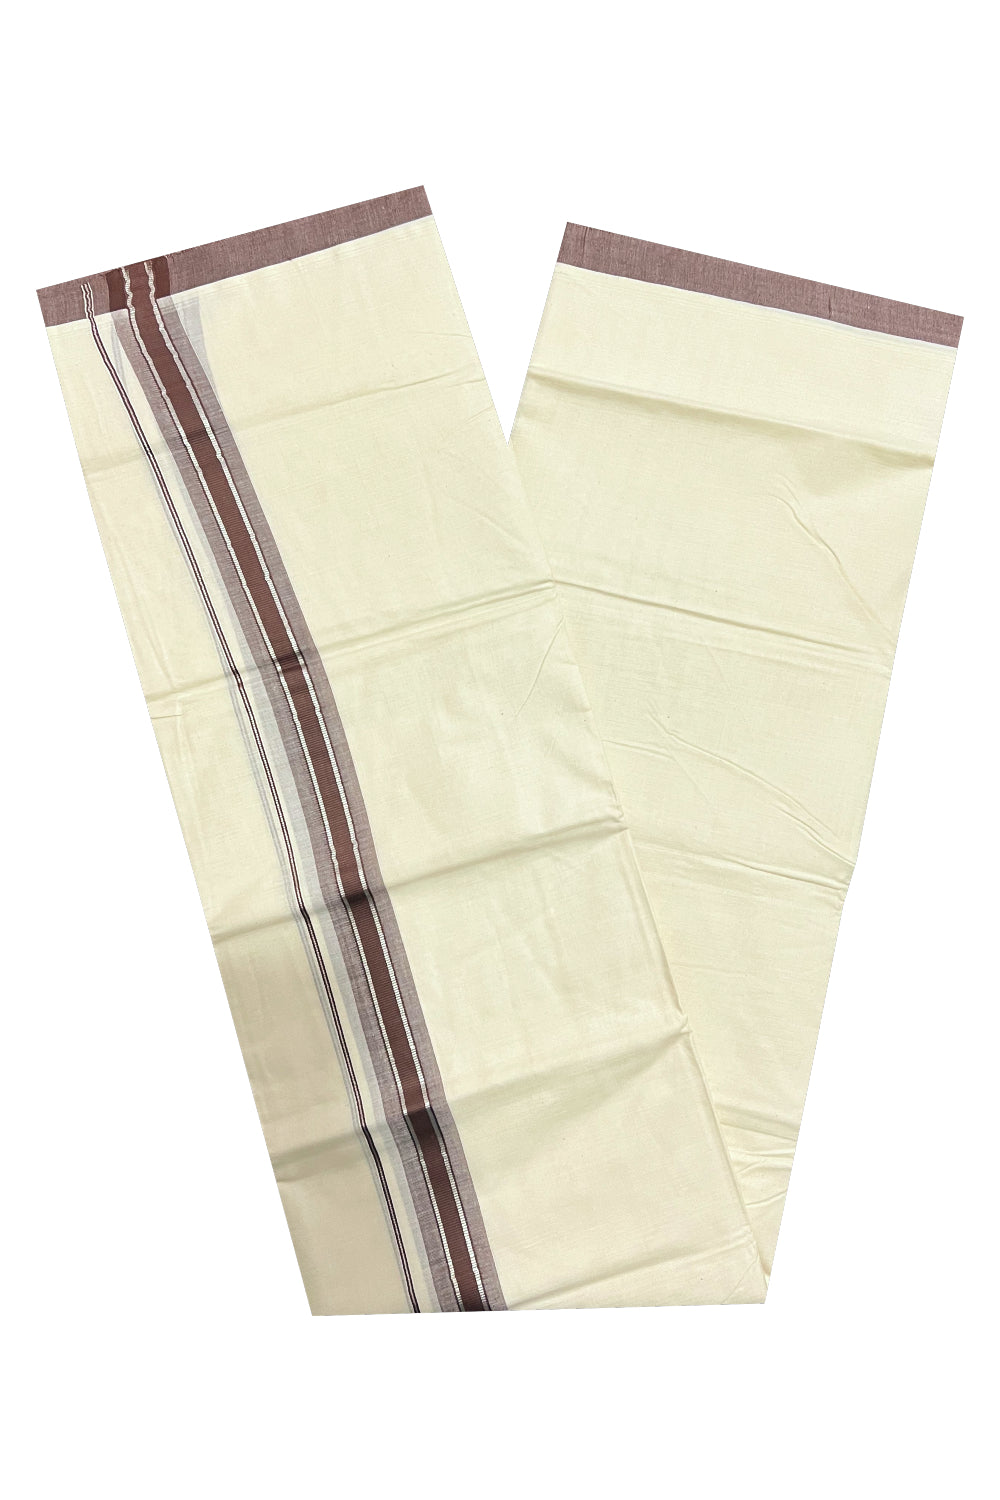 Off White Kerala Double Mundu with Silver Kasavu and Brown Border (South Indian Dhoti)